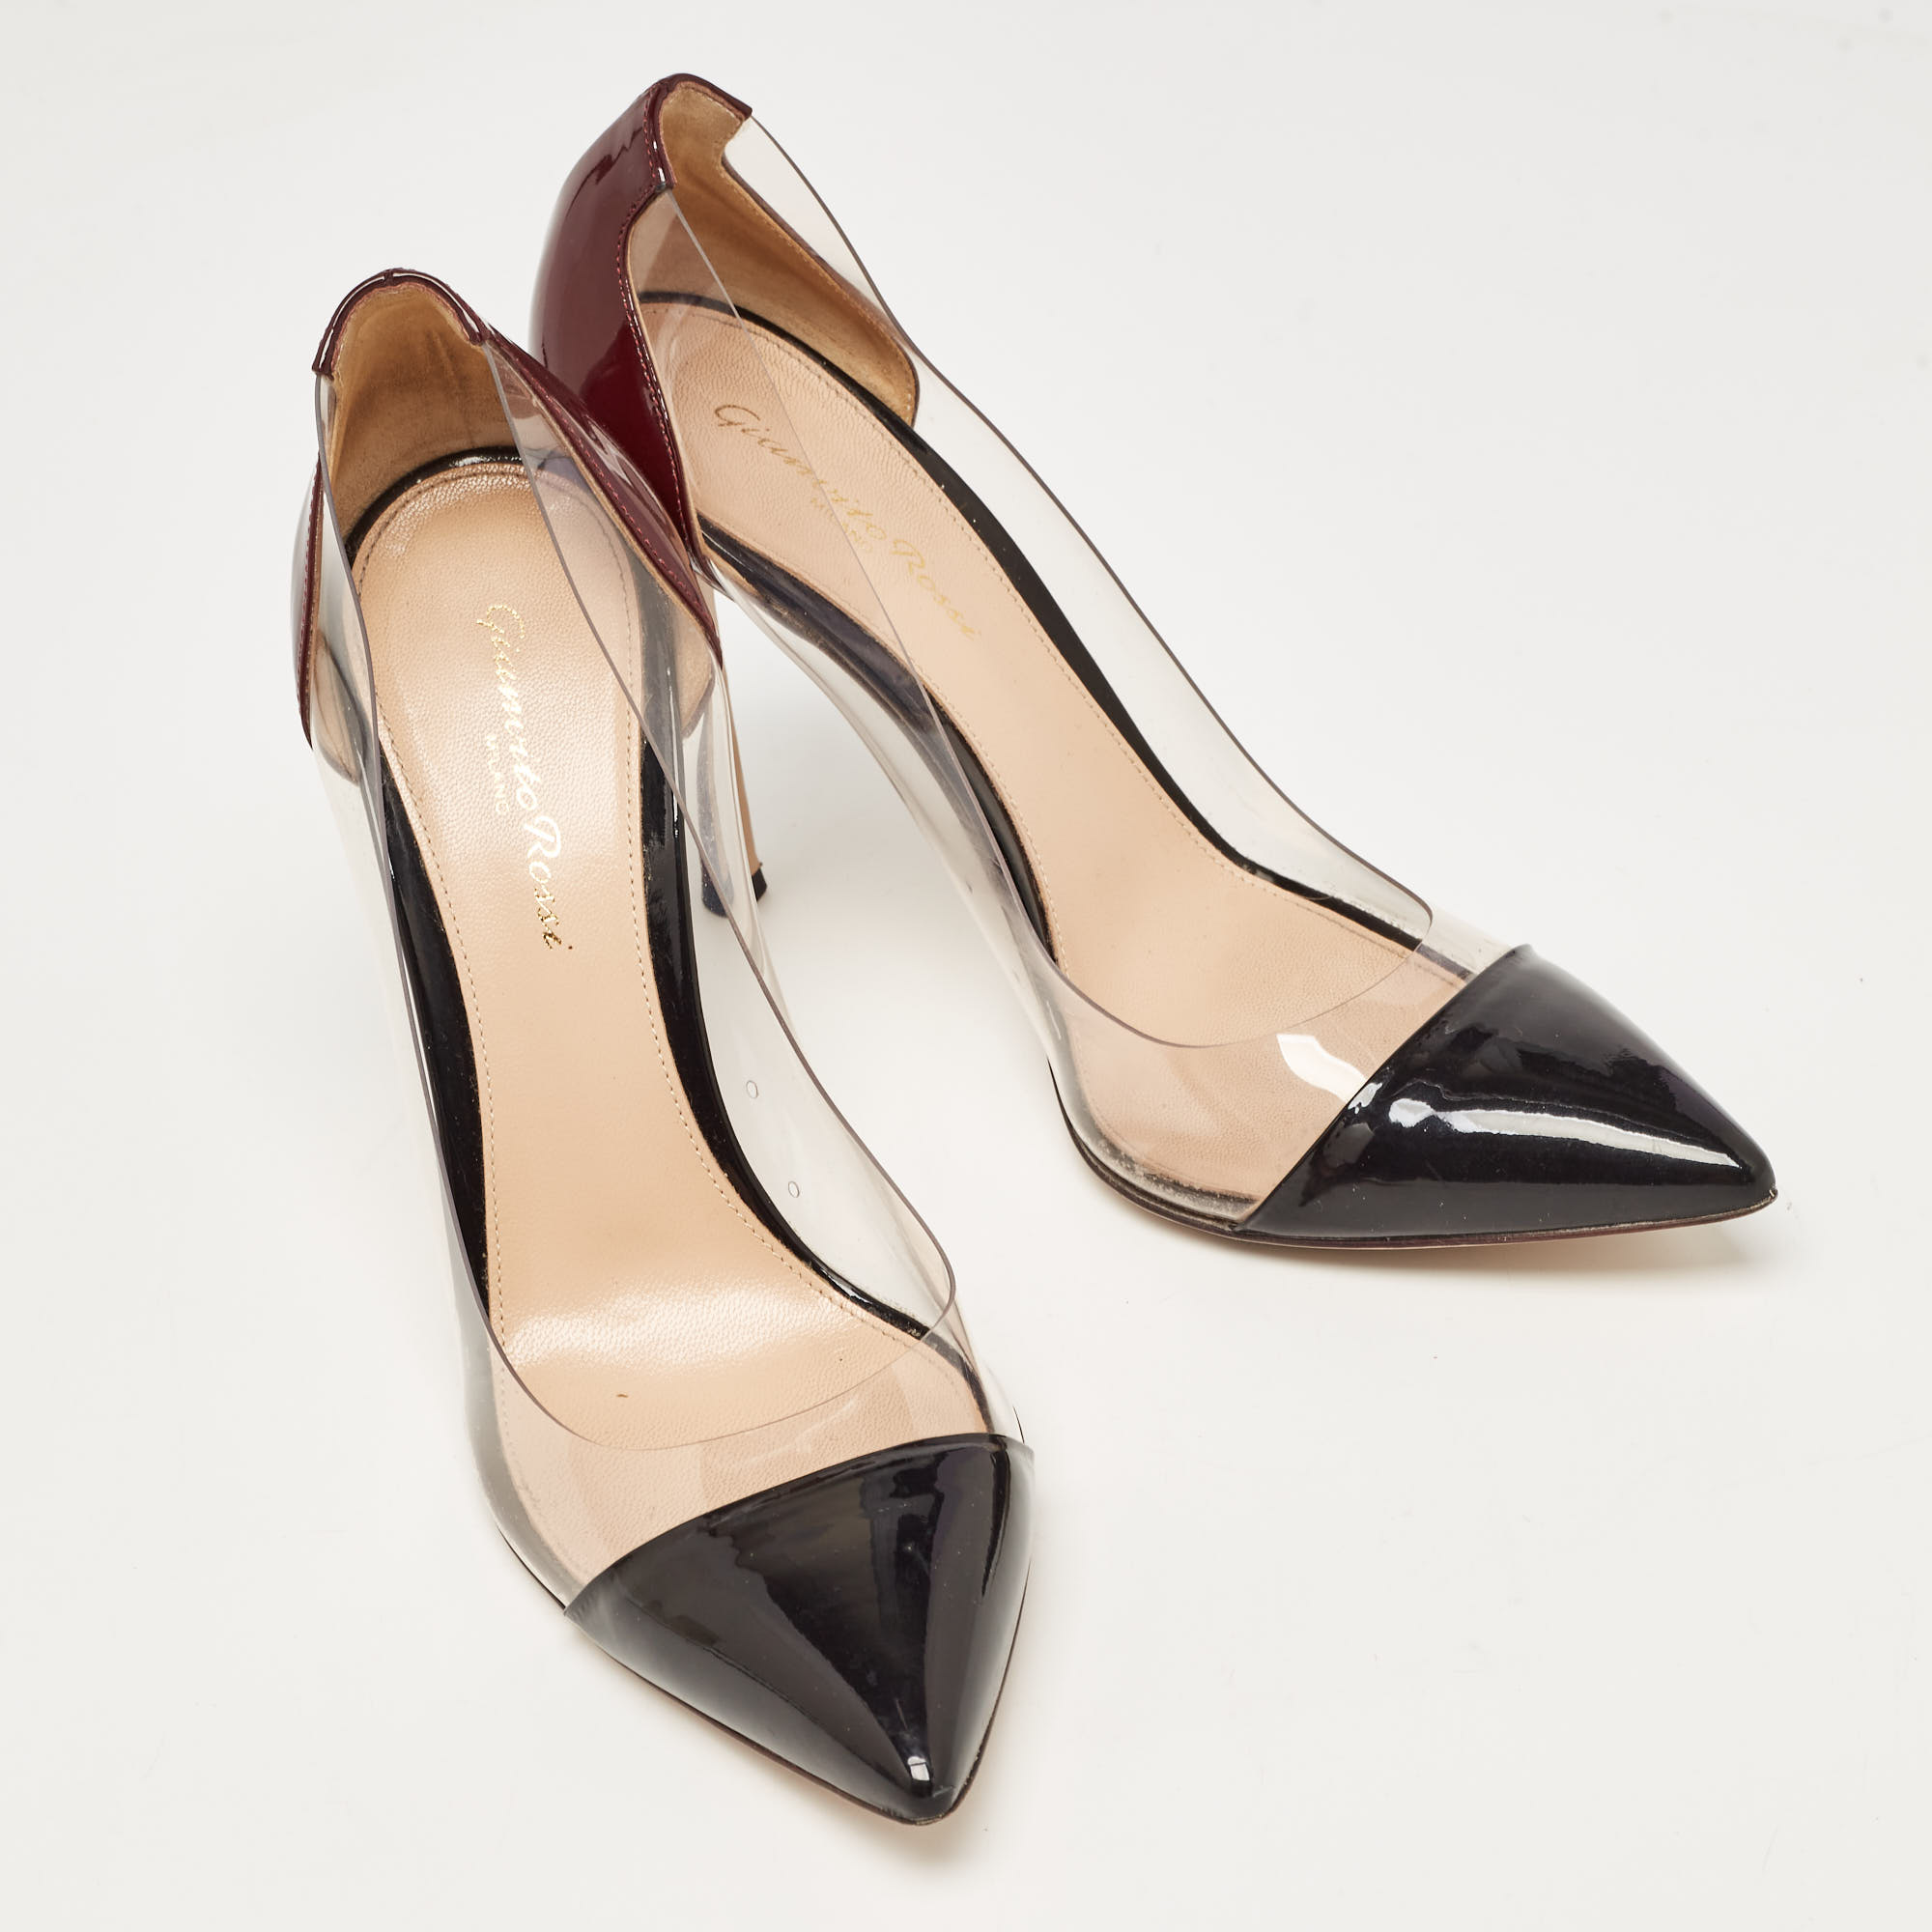 Gianvito Rossi Two Tone Patent Leather And PVC Plexi Pointed Toe Pumps Size 38.5